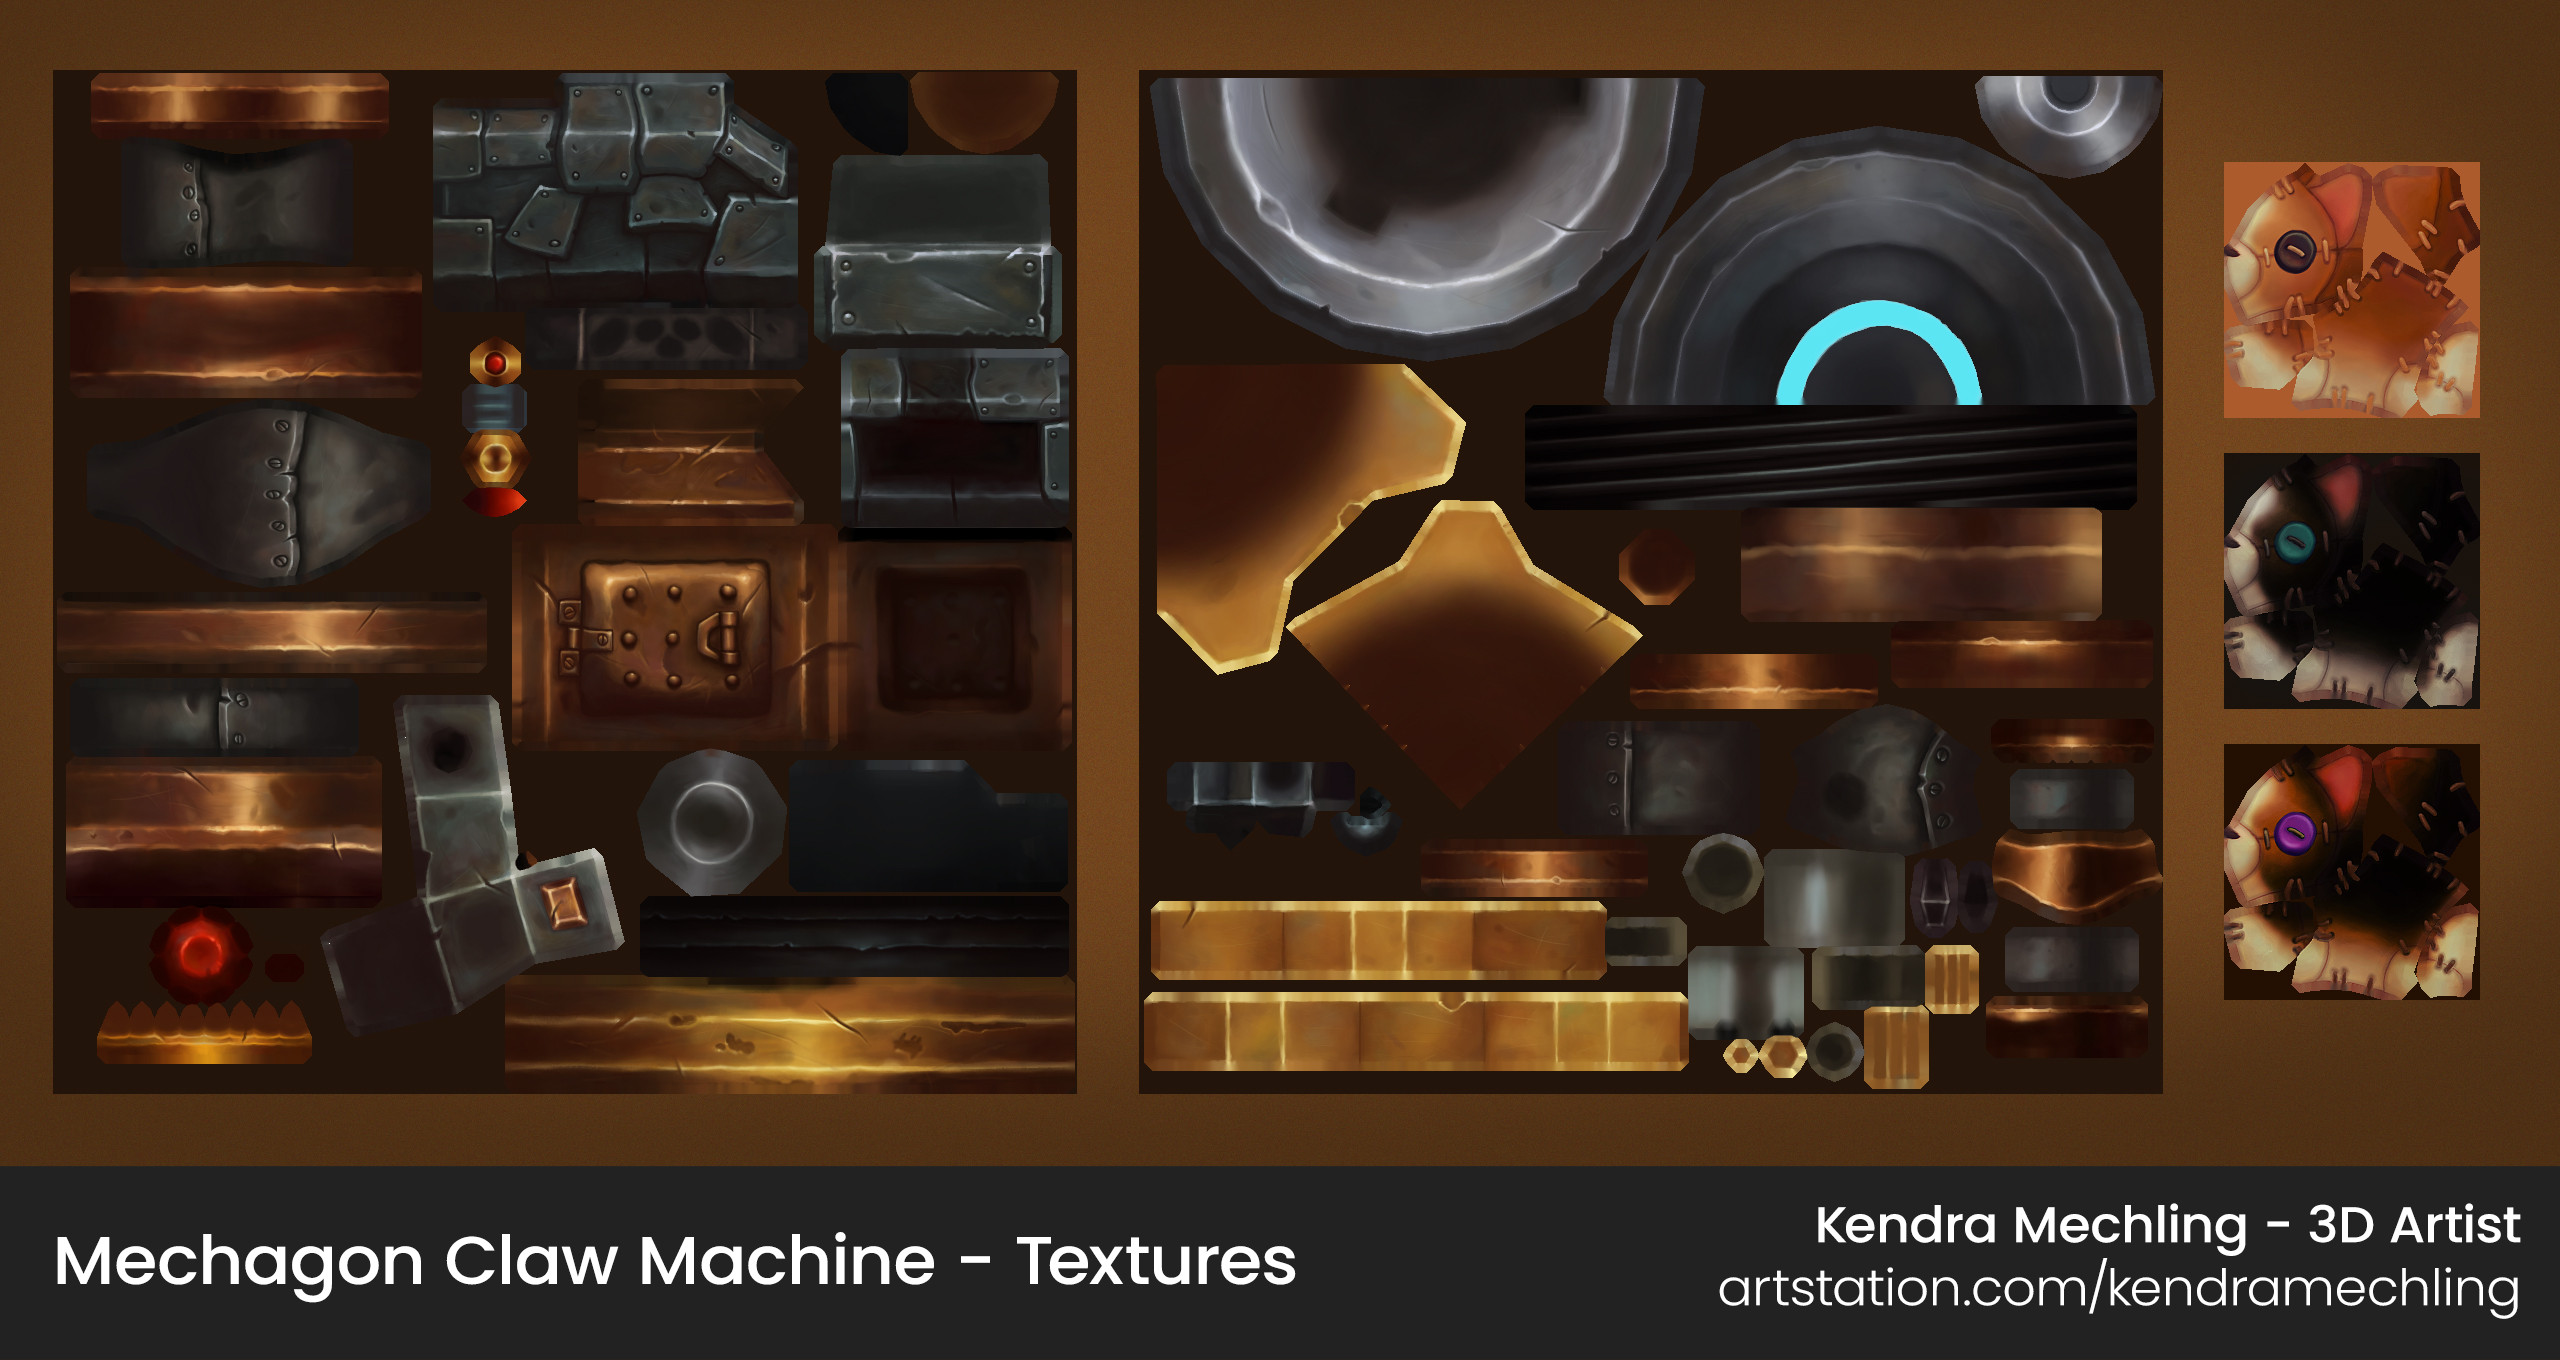 Claw Machine textures are 1024x1024, corgi textures are 256x256.